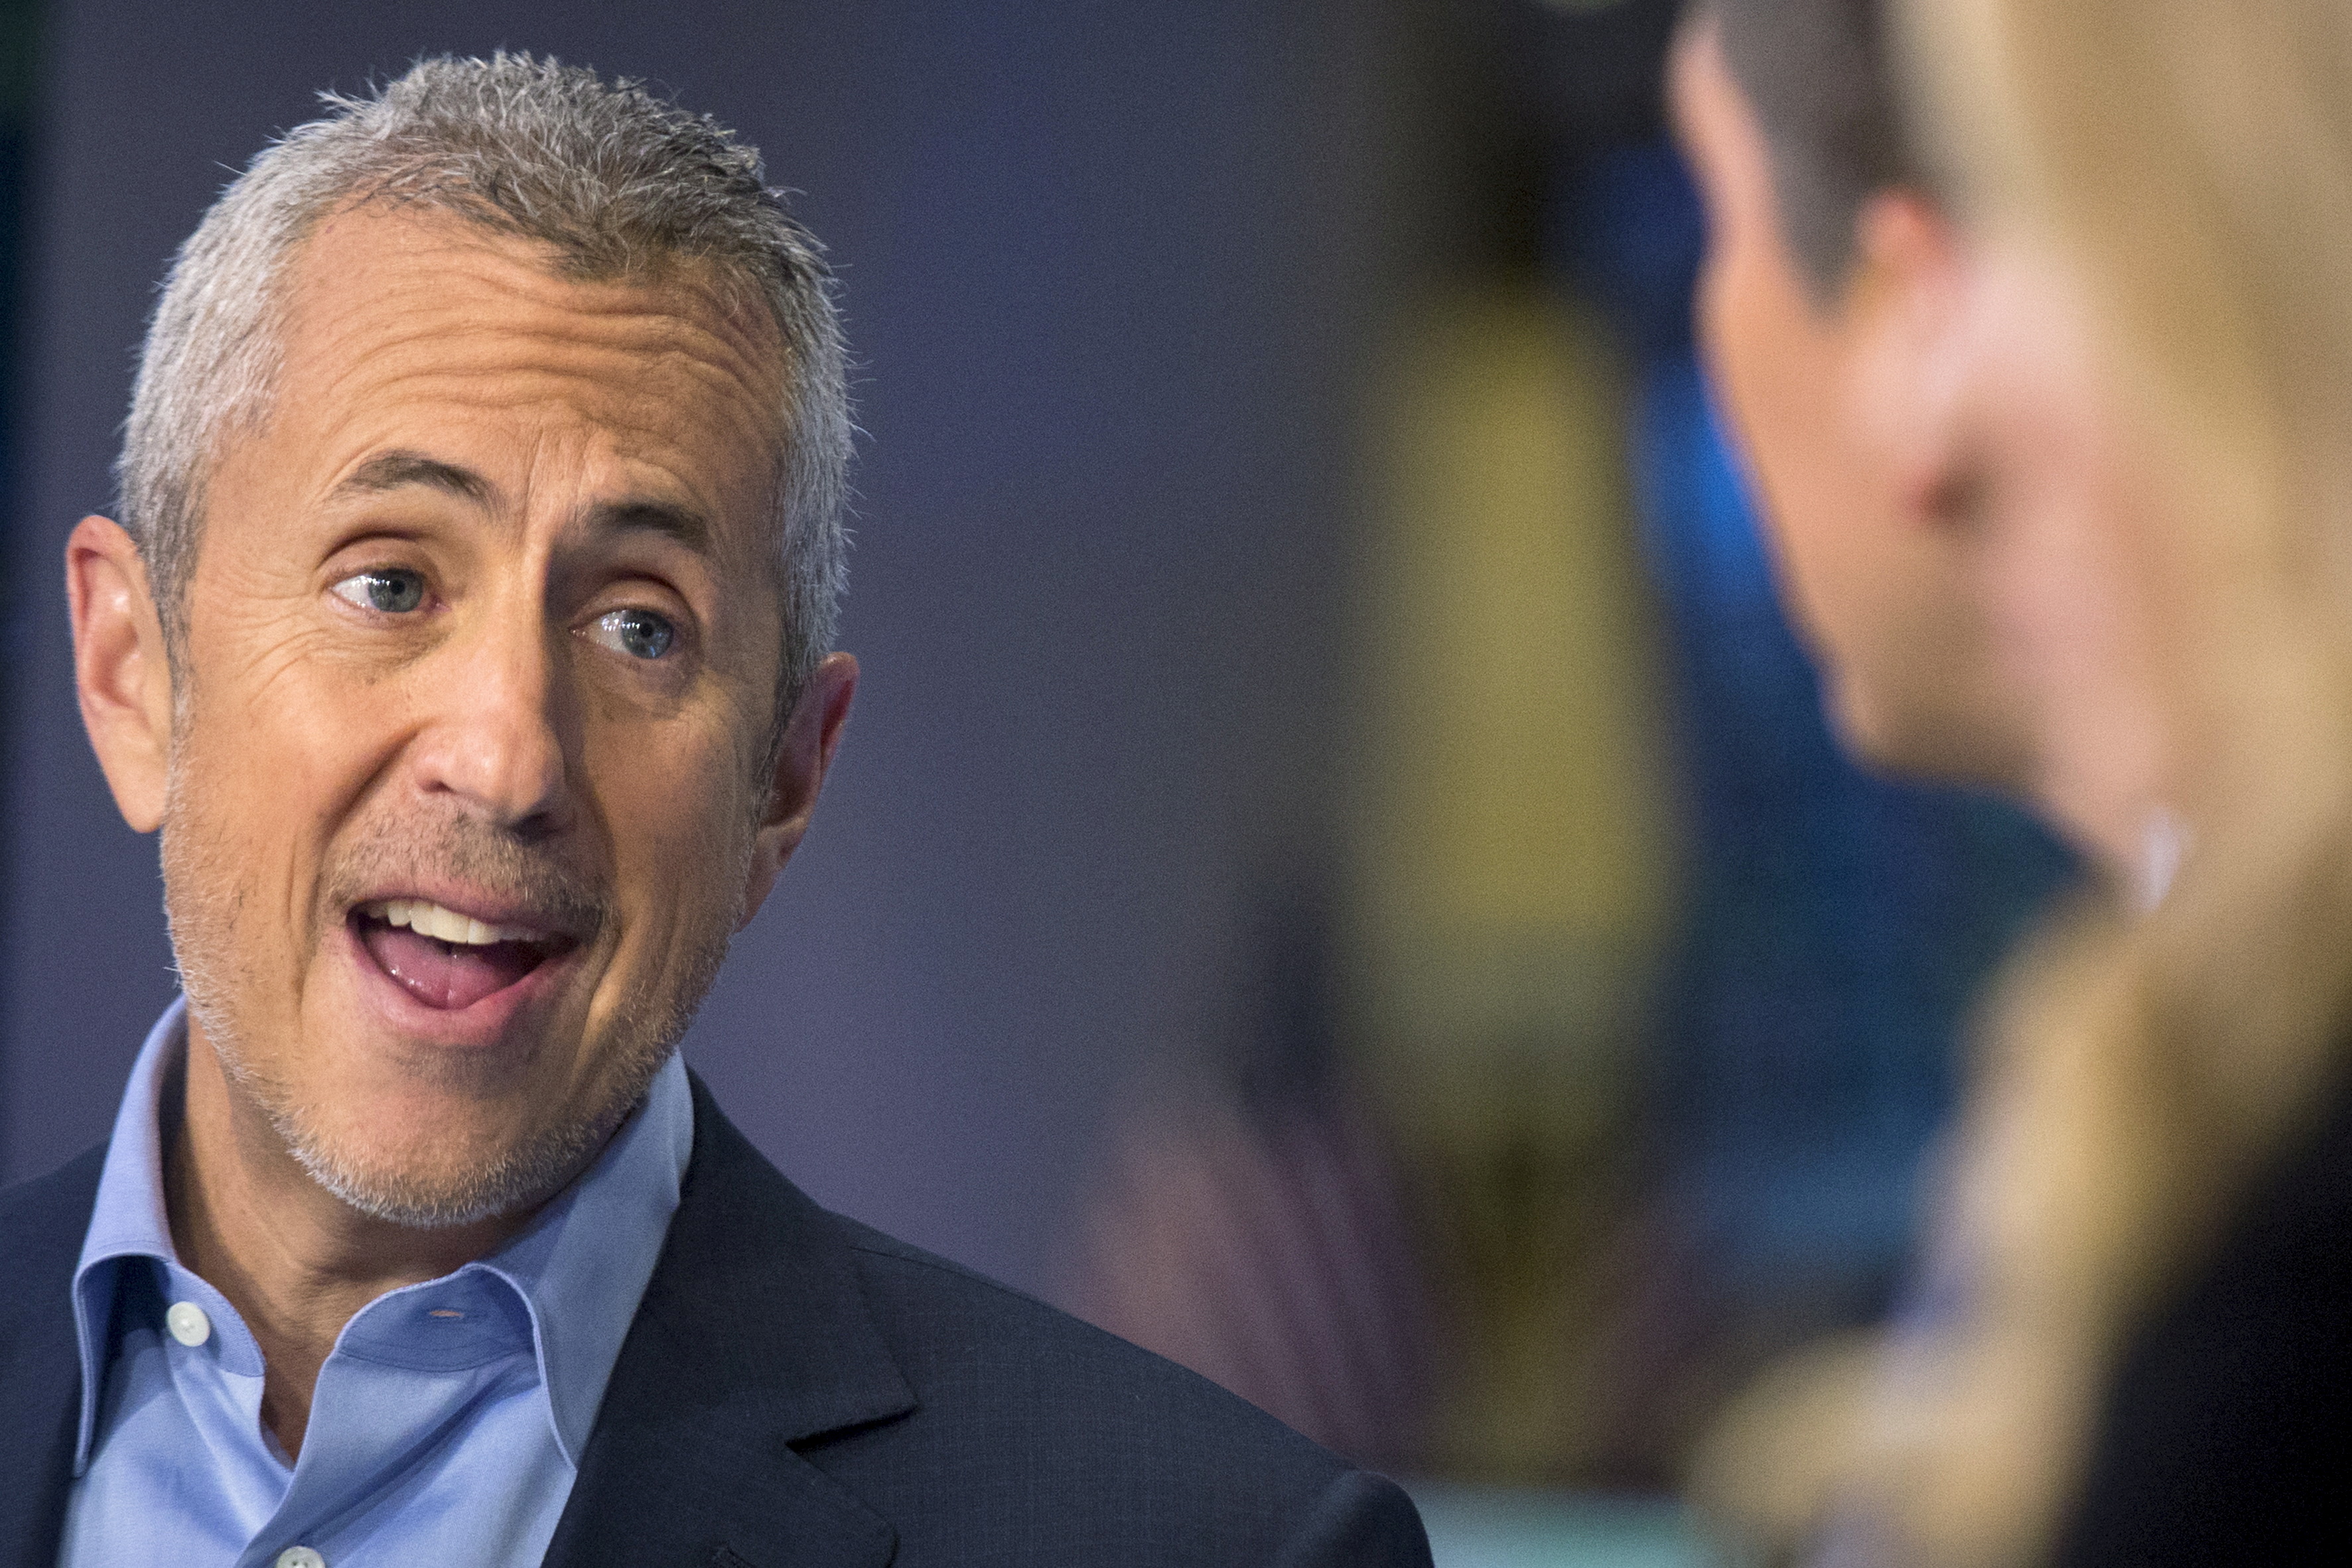  Danny Meyer, restaurateur and the CEO of the Union Square Hospitality Group speaks during an interview on CNBC on the floor of the New York Stock Exchange October 16, 2015. REUTERS/Brendan McDermid